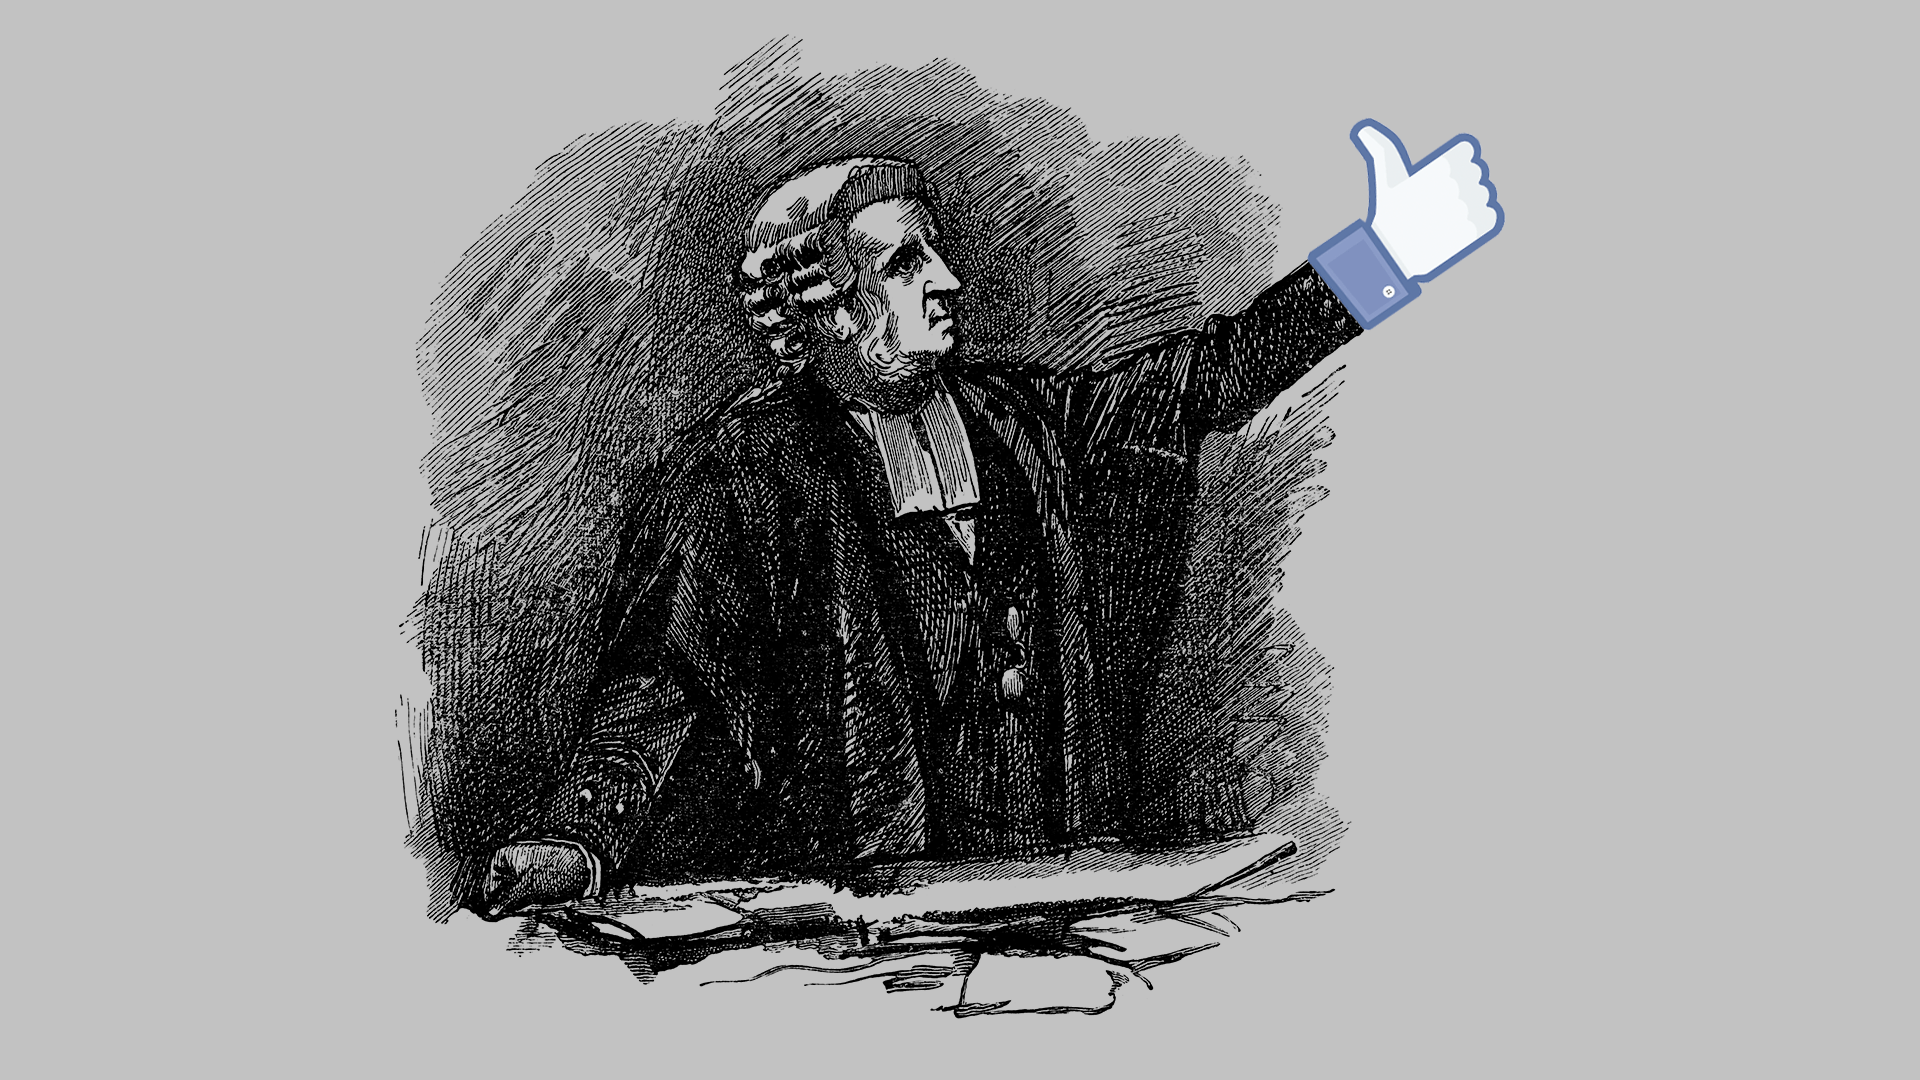 Illustration of an engraving of 19th century lawyer with a Facebook "like" as his hand